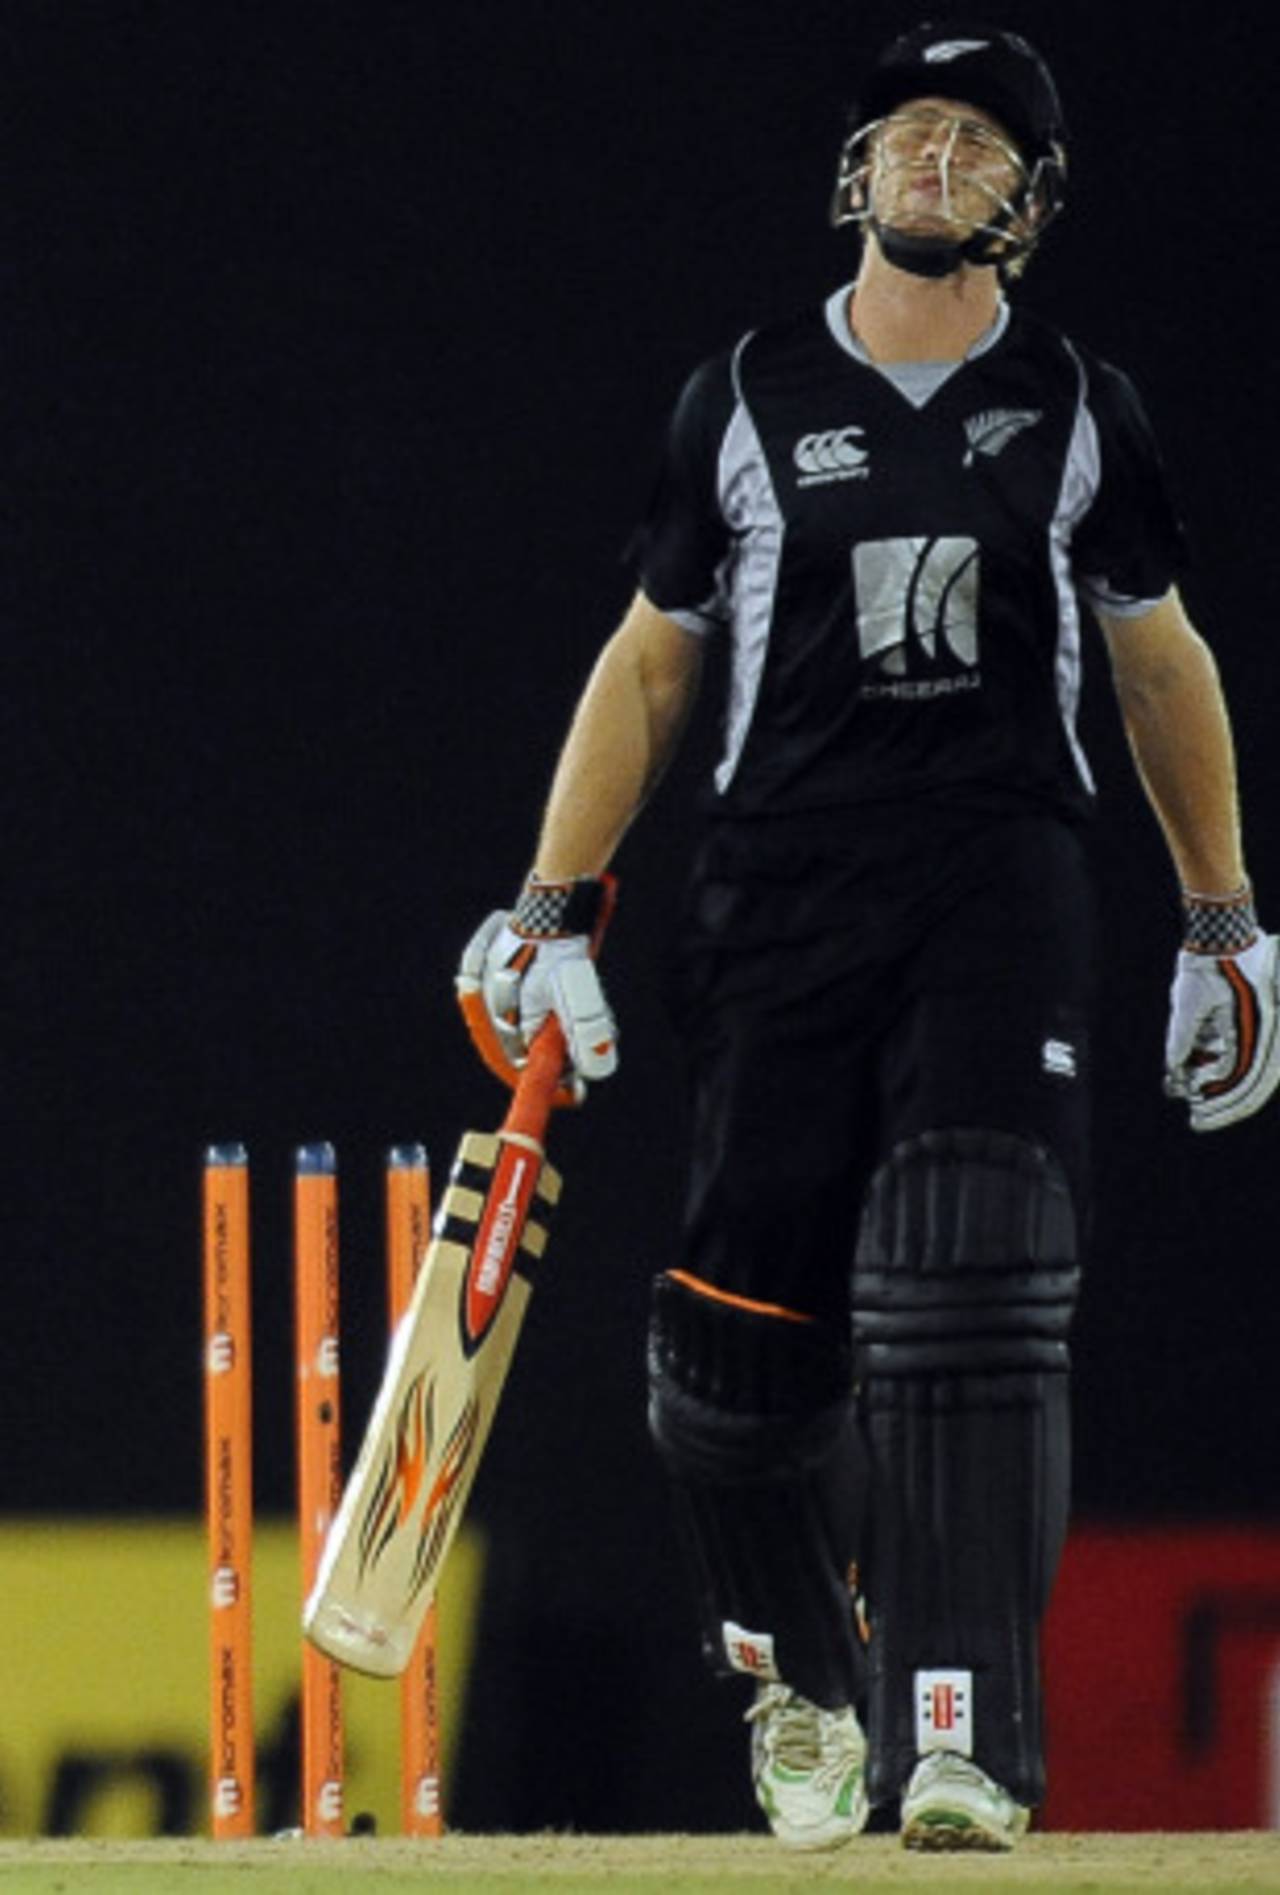 Kane Williamson is disappointed after being bowled by Ishant Sharma, tri-series, 6th ODI, Dambulla, August 25, 2010